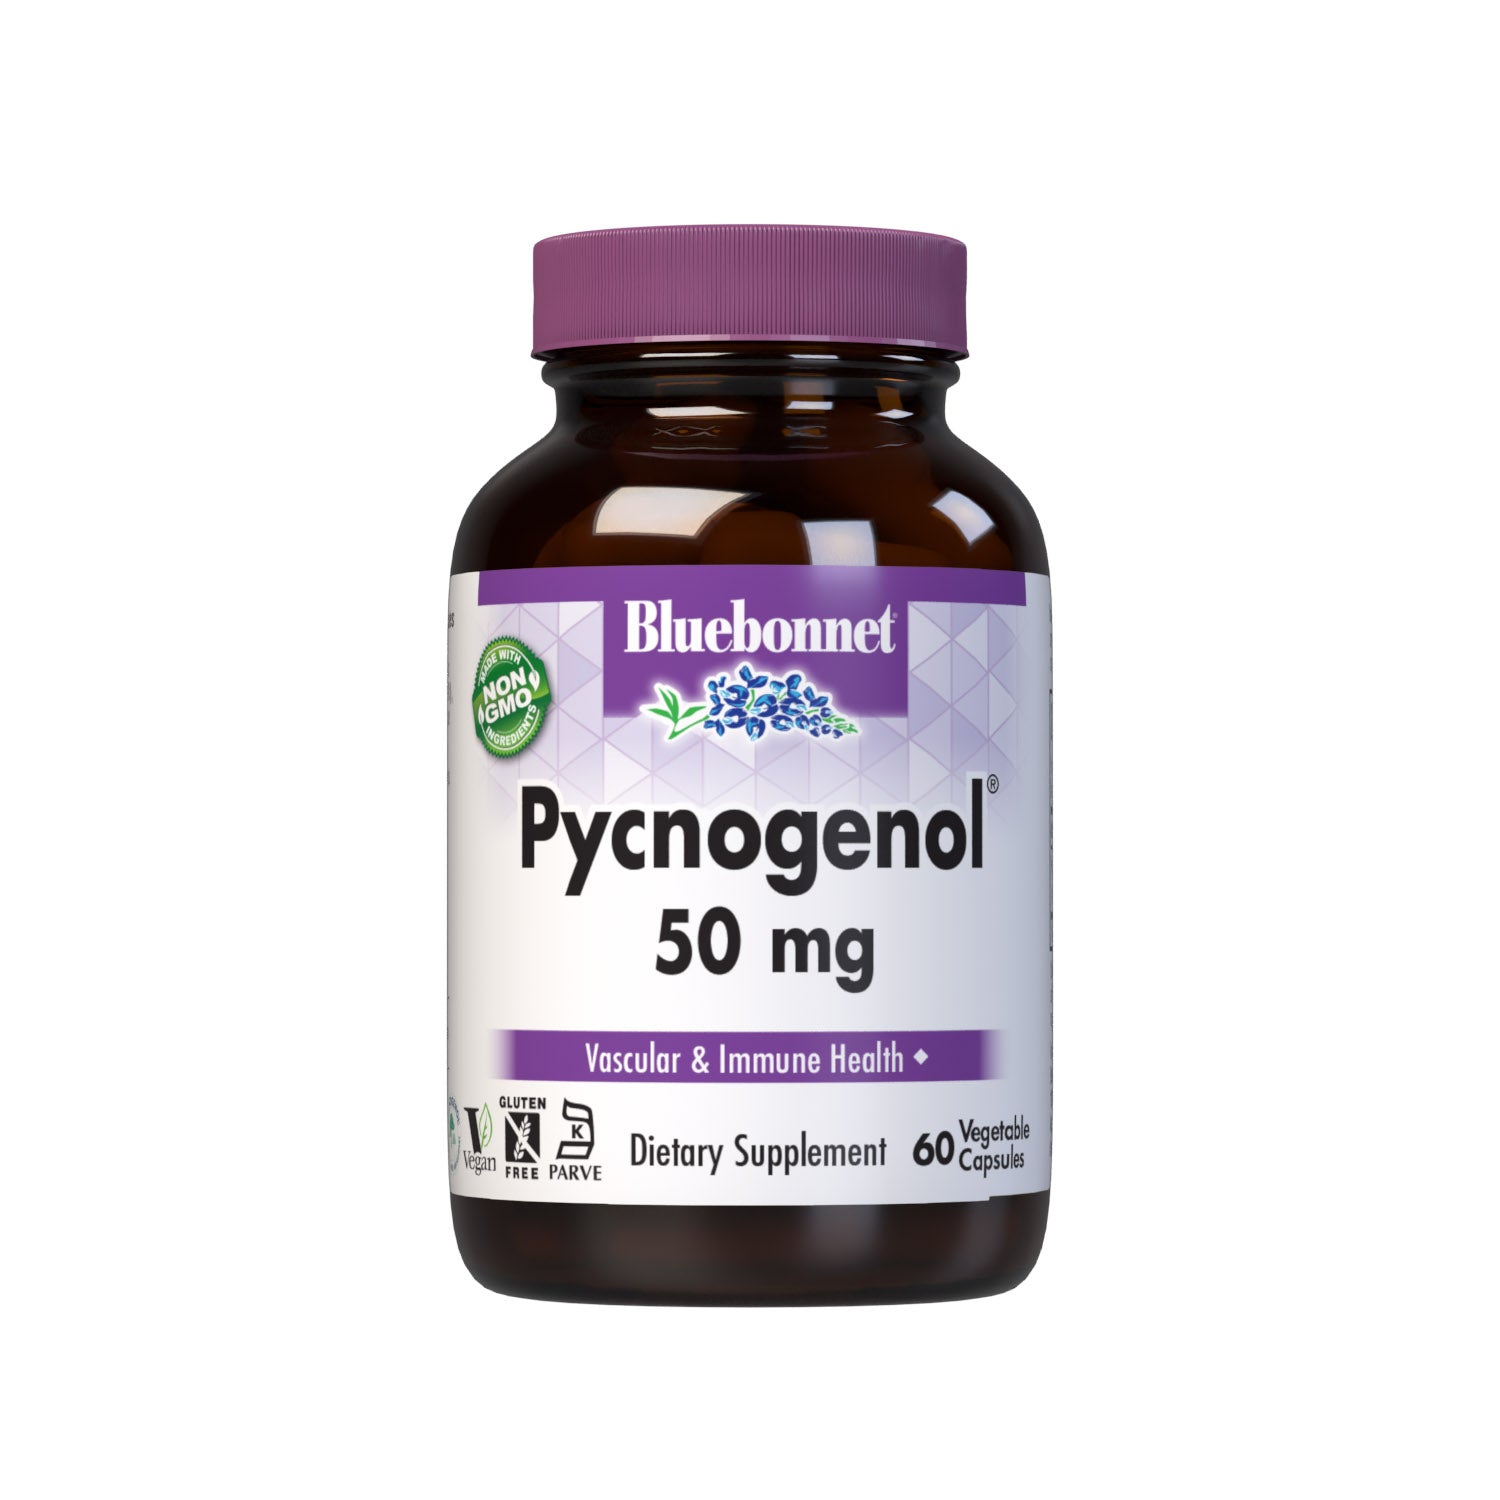 Bluebonnet’s Pycnogenol 50 mg 60 Vegetable Capsules are derived from the bark of the European coastal pine, Pinus maritima. Pycnogenol is a plant extract concentrated in oligomeric proanthocyanidins (OPCs), a water-soluble bioflavonoid. Pycnogenol may help support vascular function and immune response. #size_60 count